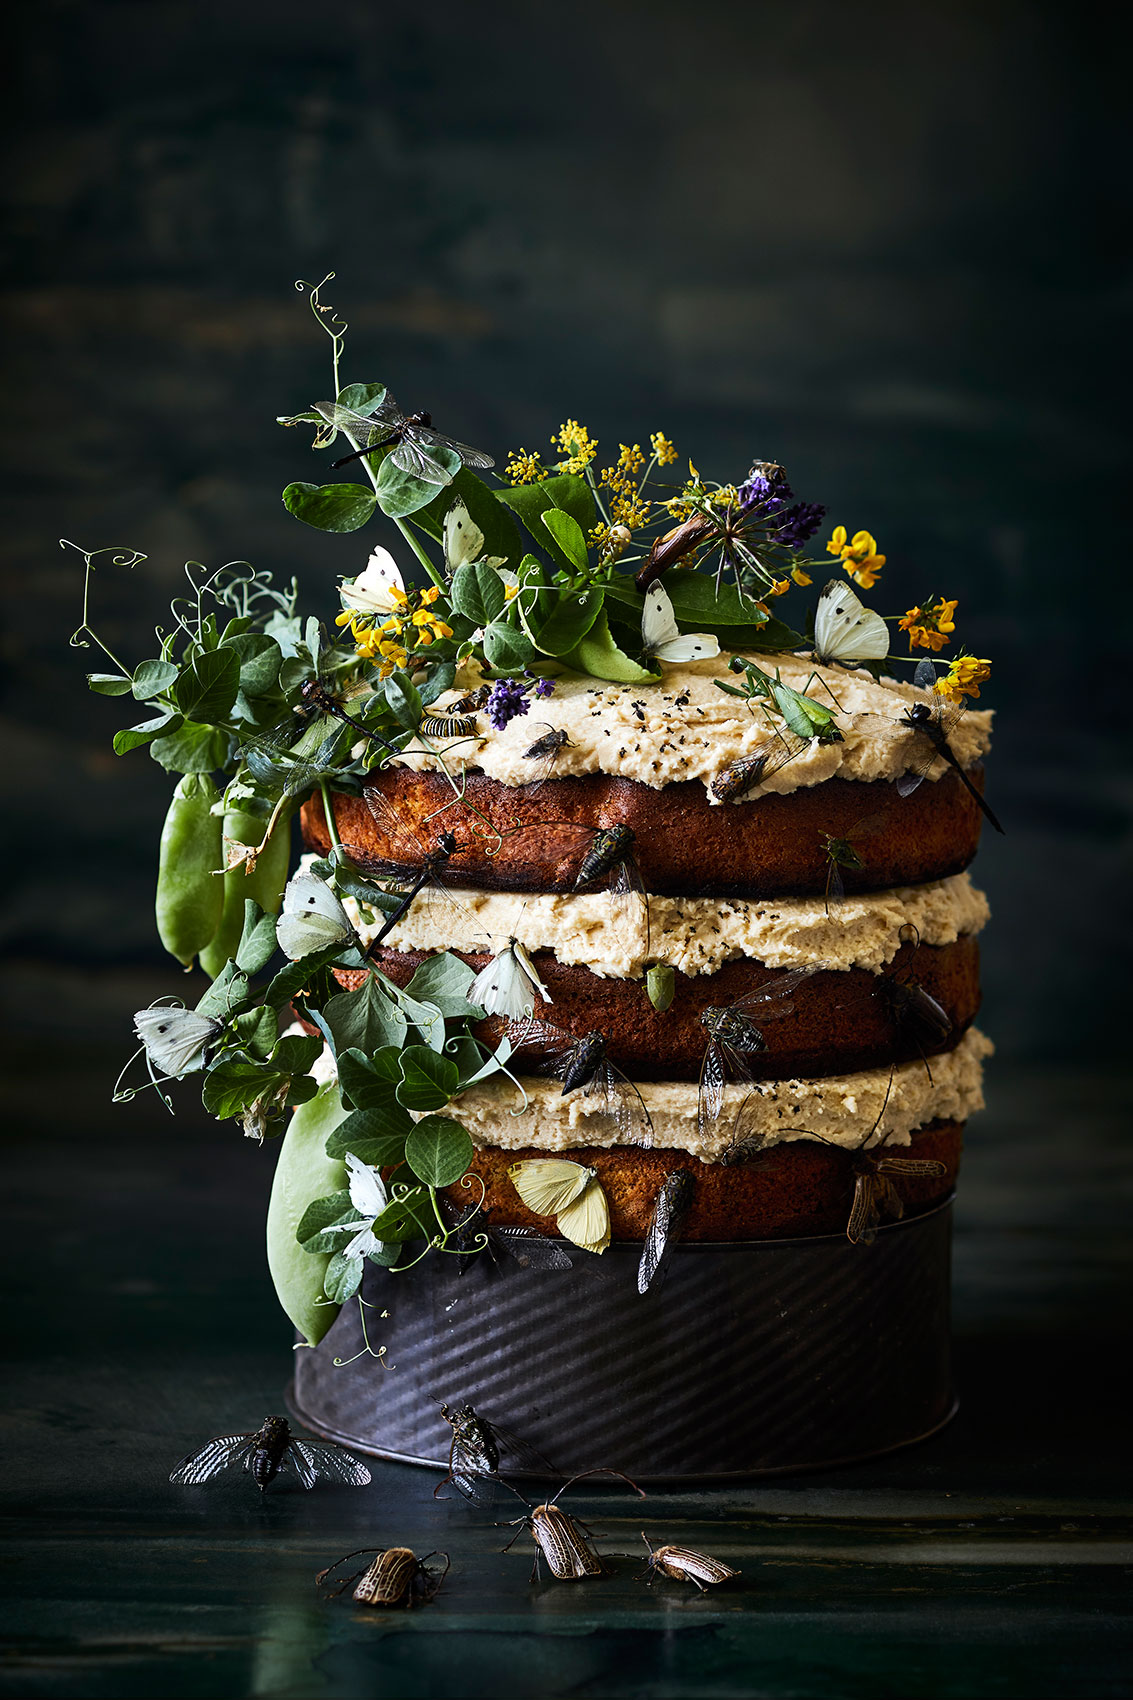 The Bug Project • Layered Picnic Honey Cake with Wild Foliage • Advertising & Fine Art